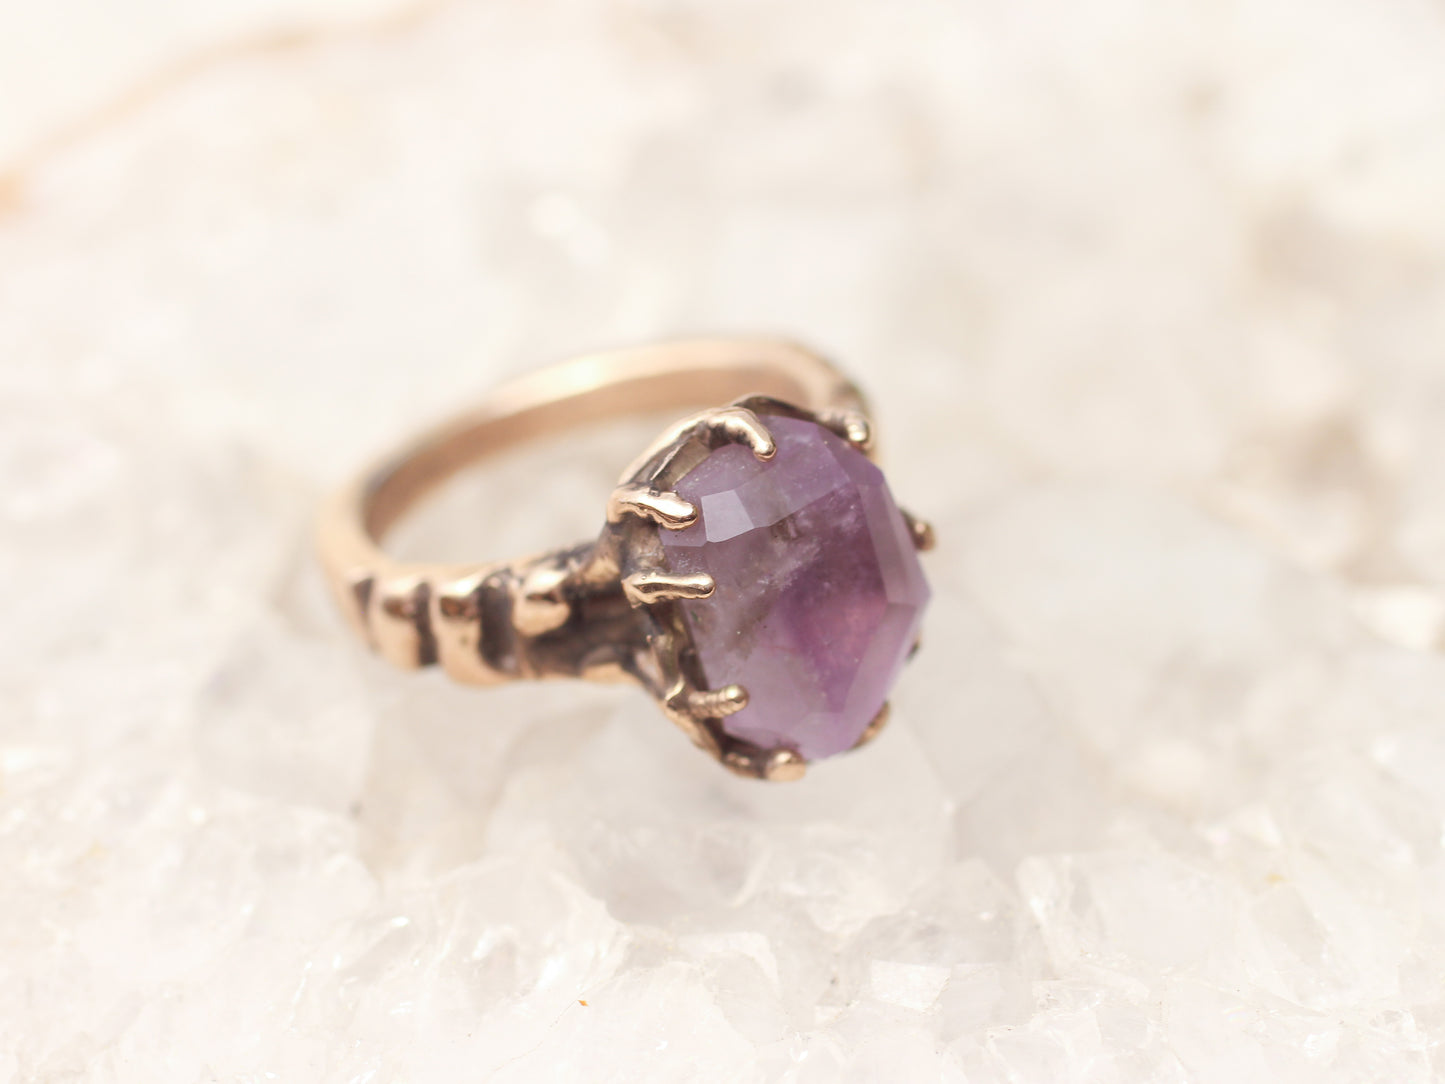 Faceted Amethyst ring - Size 6.5